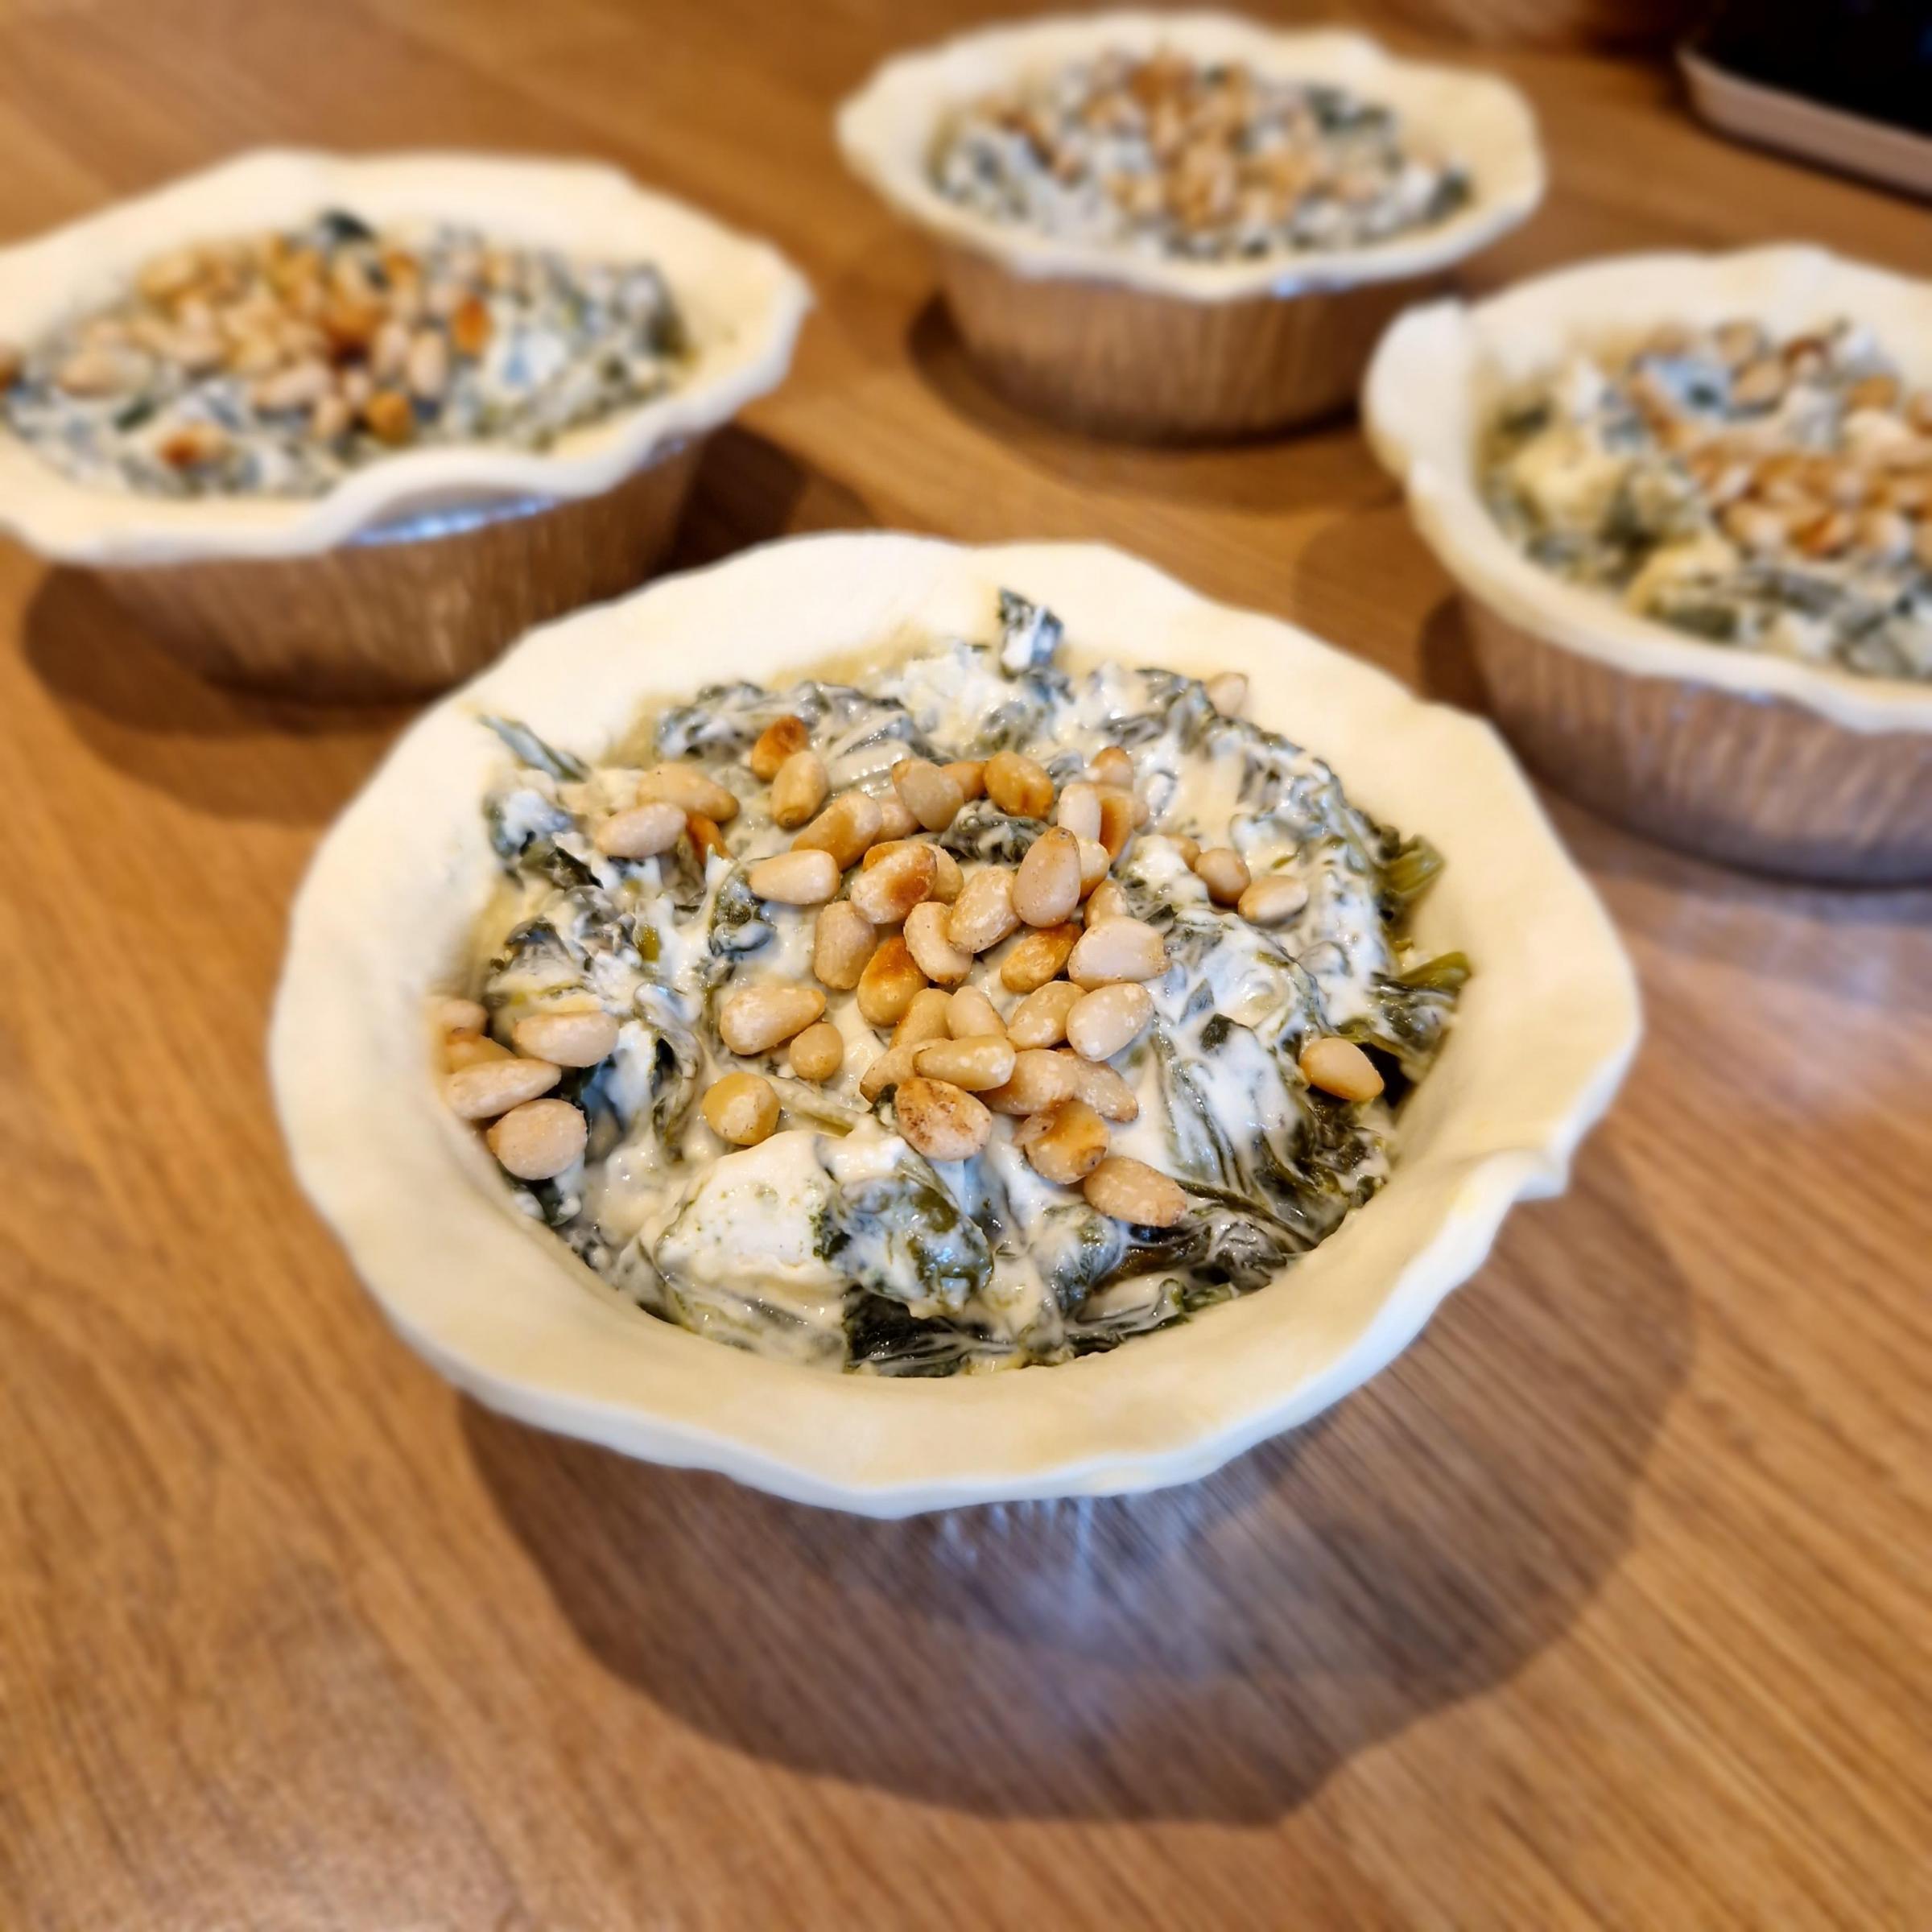 Pies filled with creamy feta, spinach and toasted pine nuts